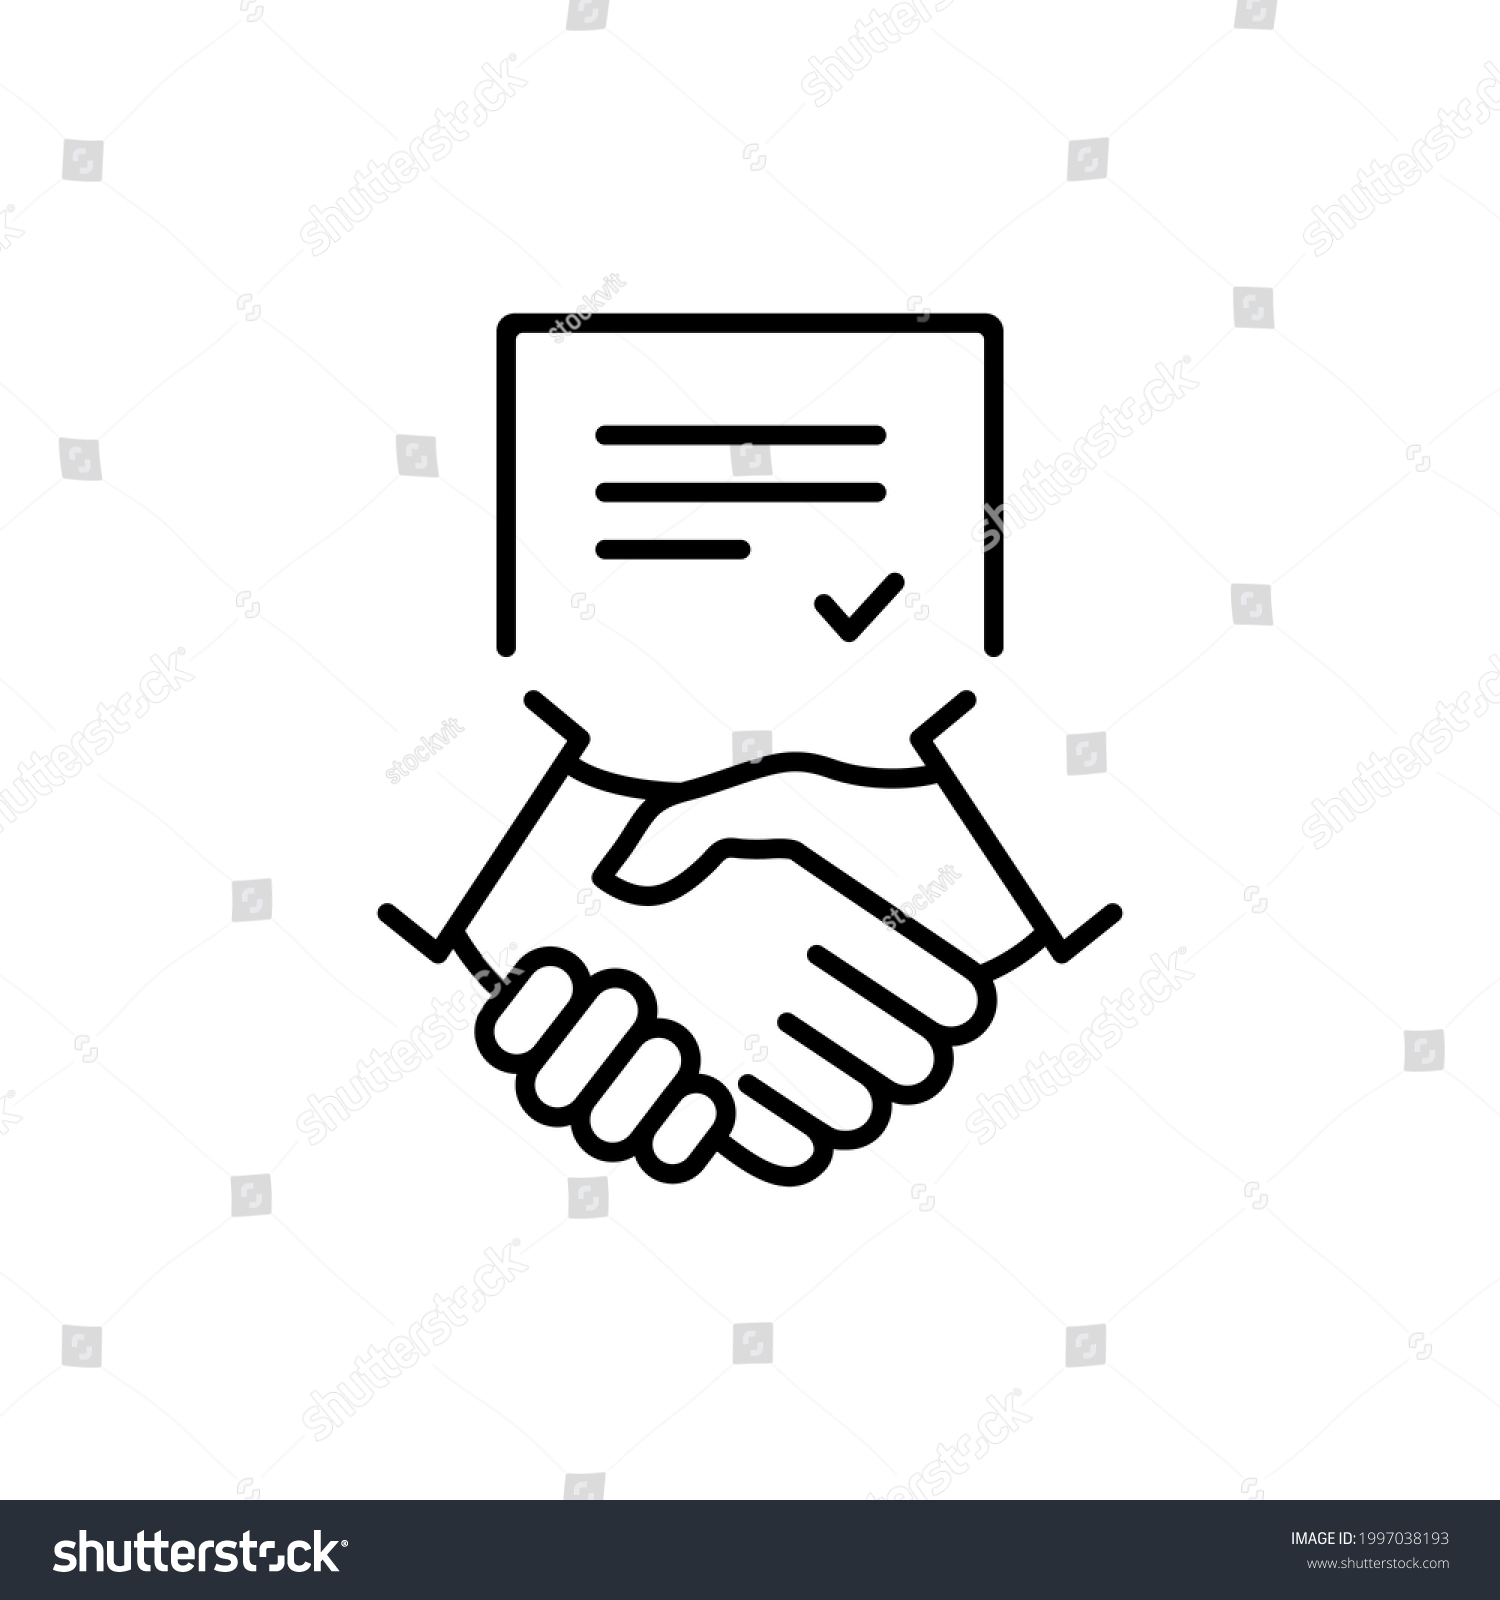 Business handshake teamwork linear concept. Contract line icon. Financial deal pictogram. Agreement signing symbol. Vector isolated on white. #1997038193